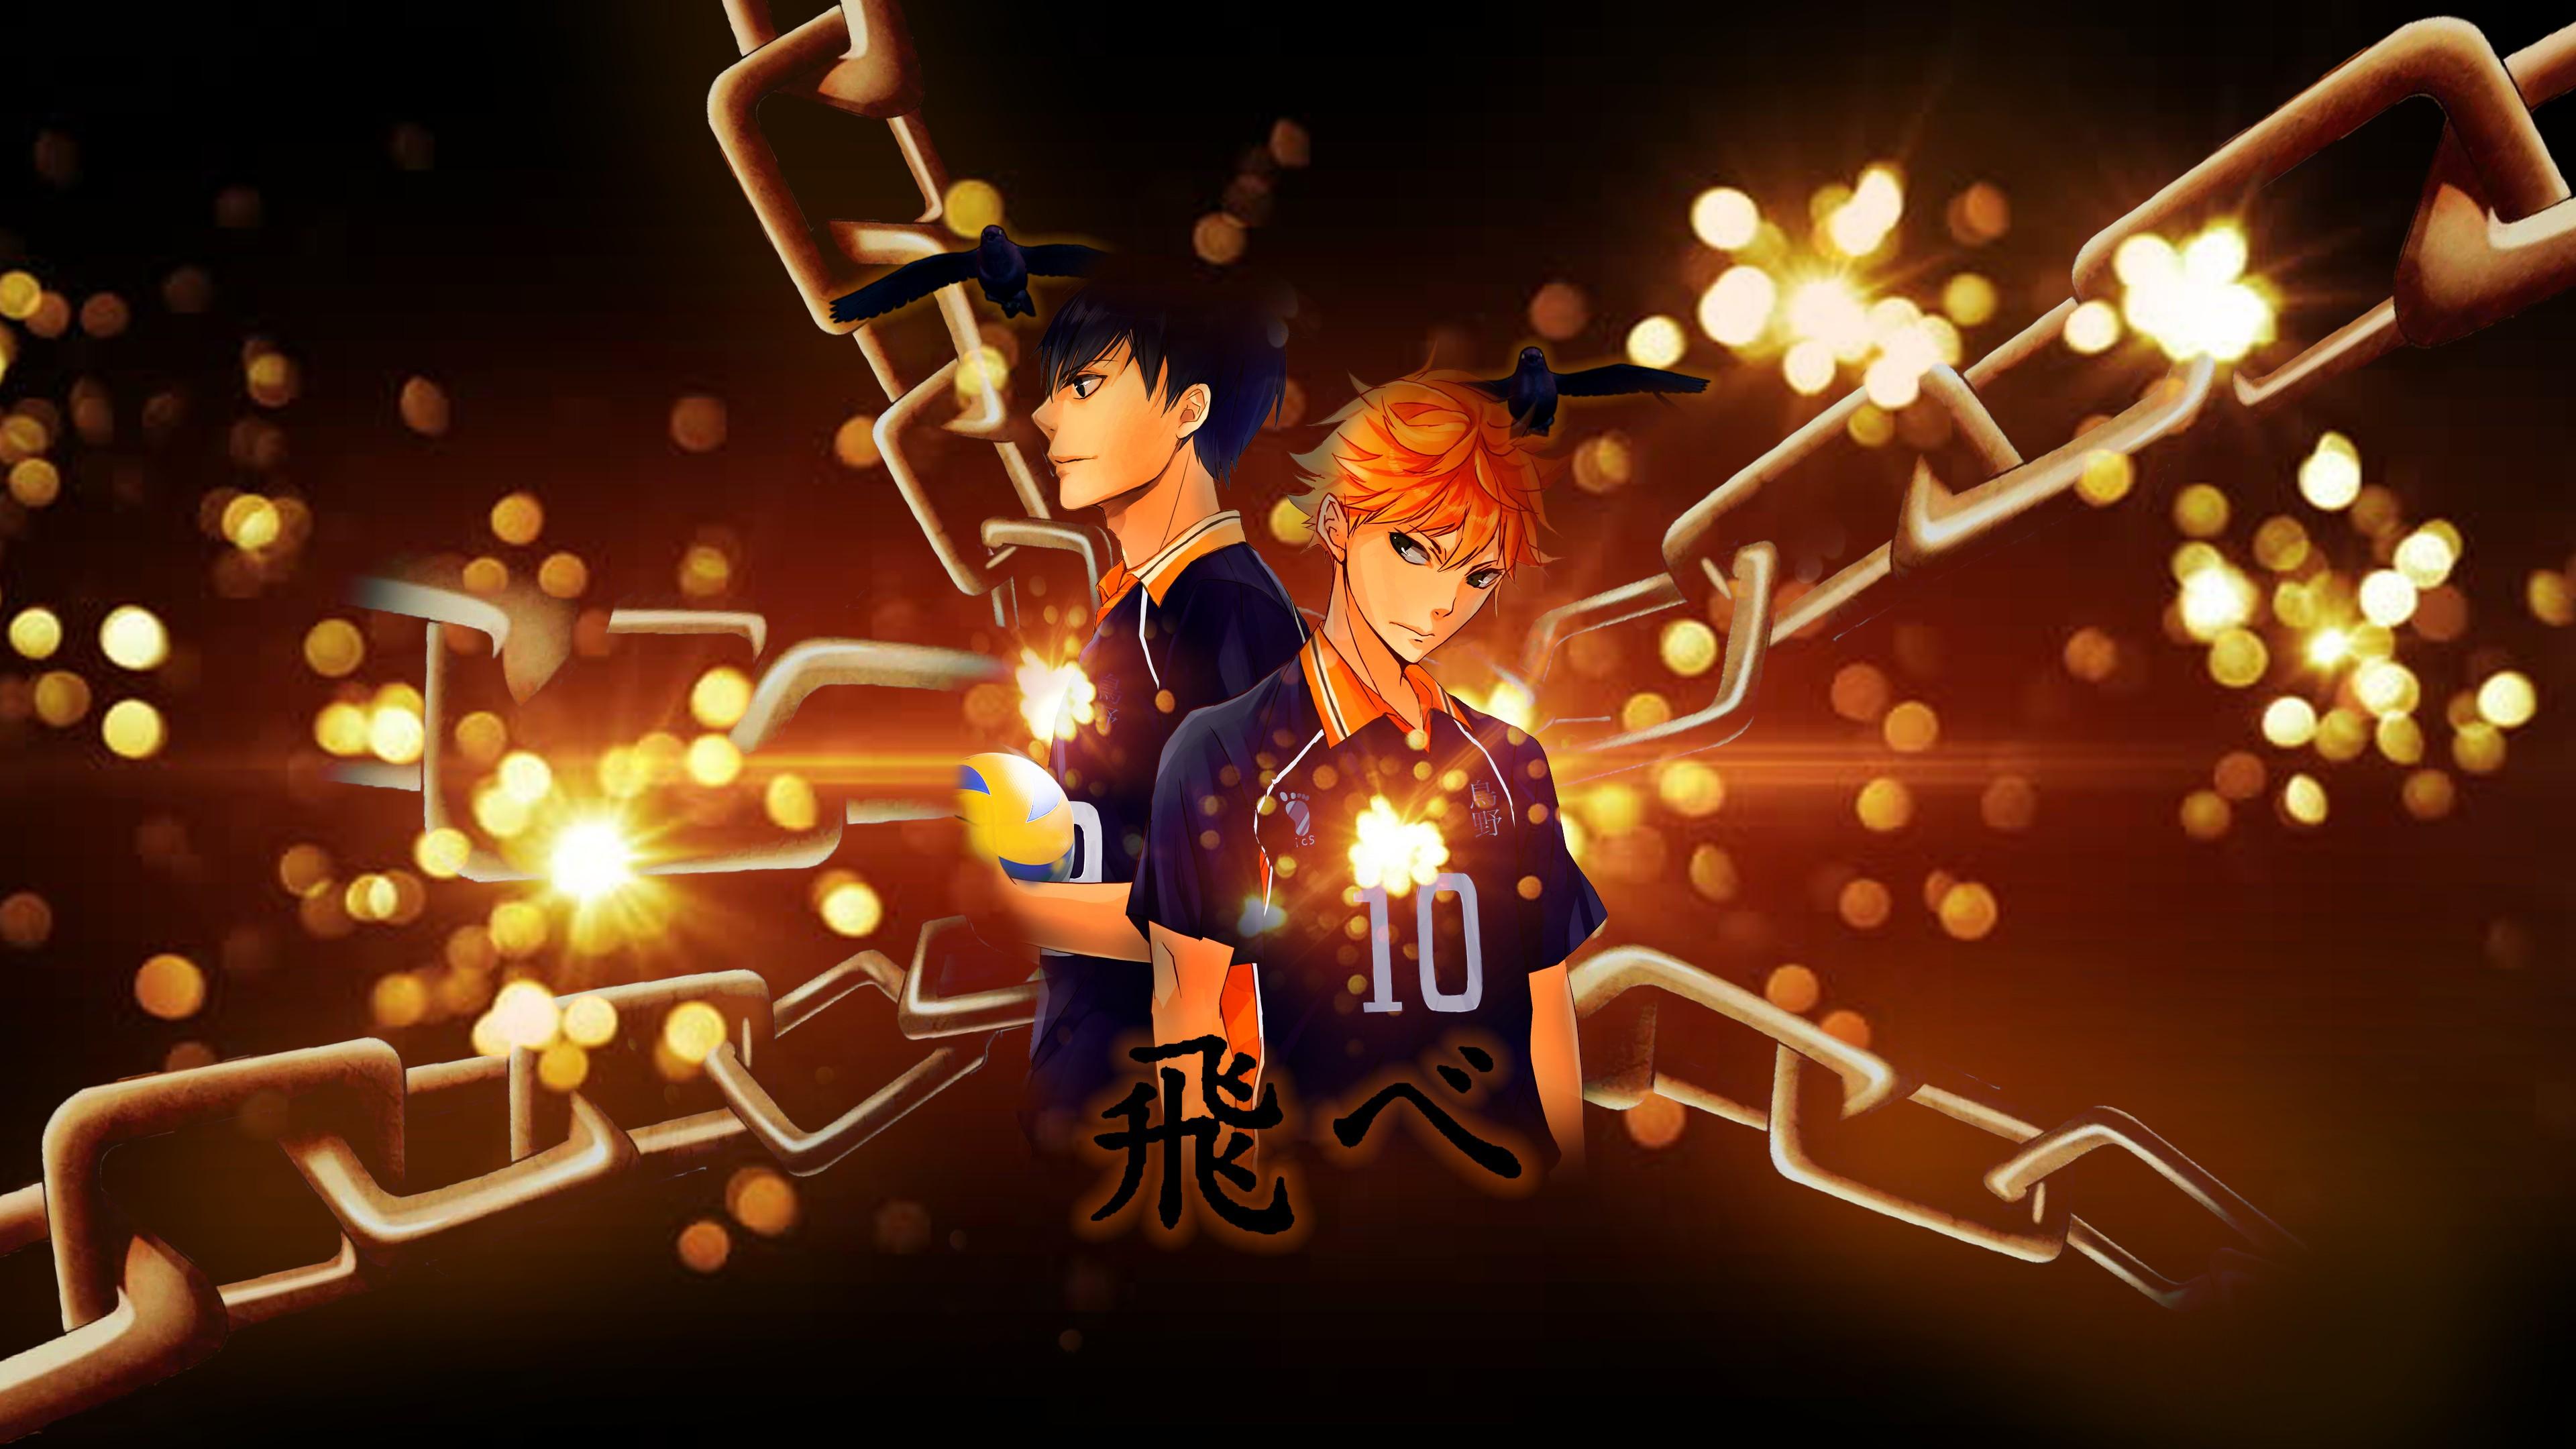 3840 x 2160 · jpeg - Haikyuu wallpaper 1 Download free cool High Resolution wallpapers for ...